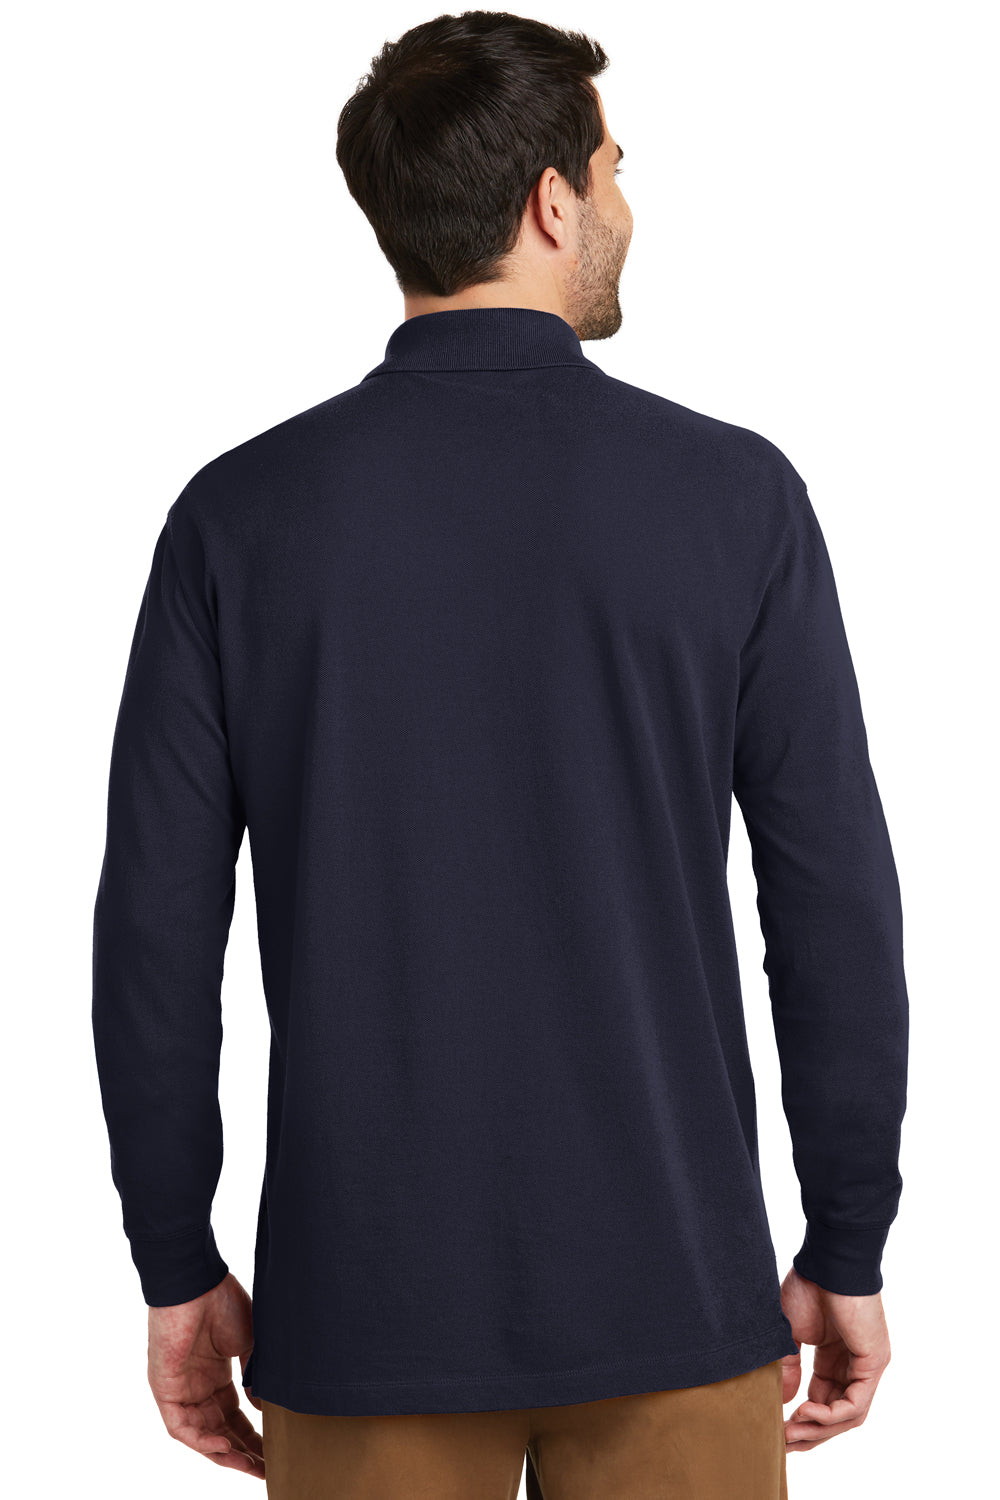 Port Authority K8000LS Mens Wrinkle Resistant Long Sleeve Polo Shirt Navy Blue Back